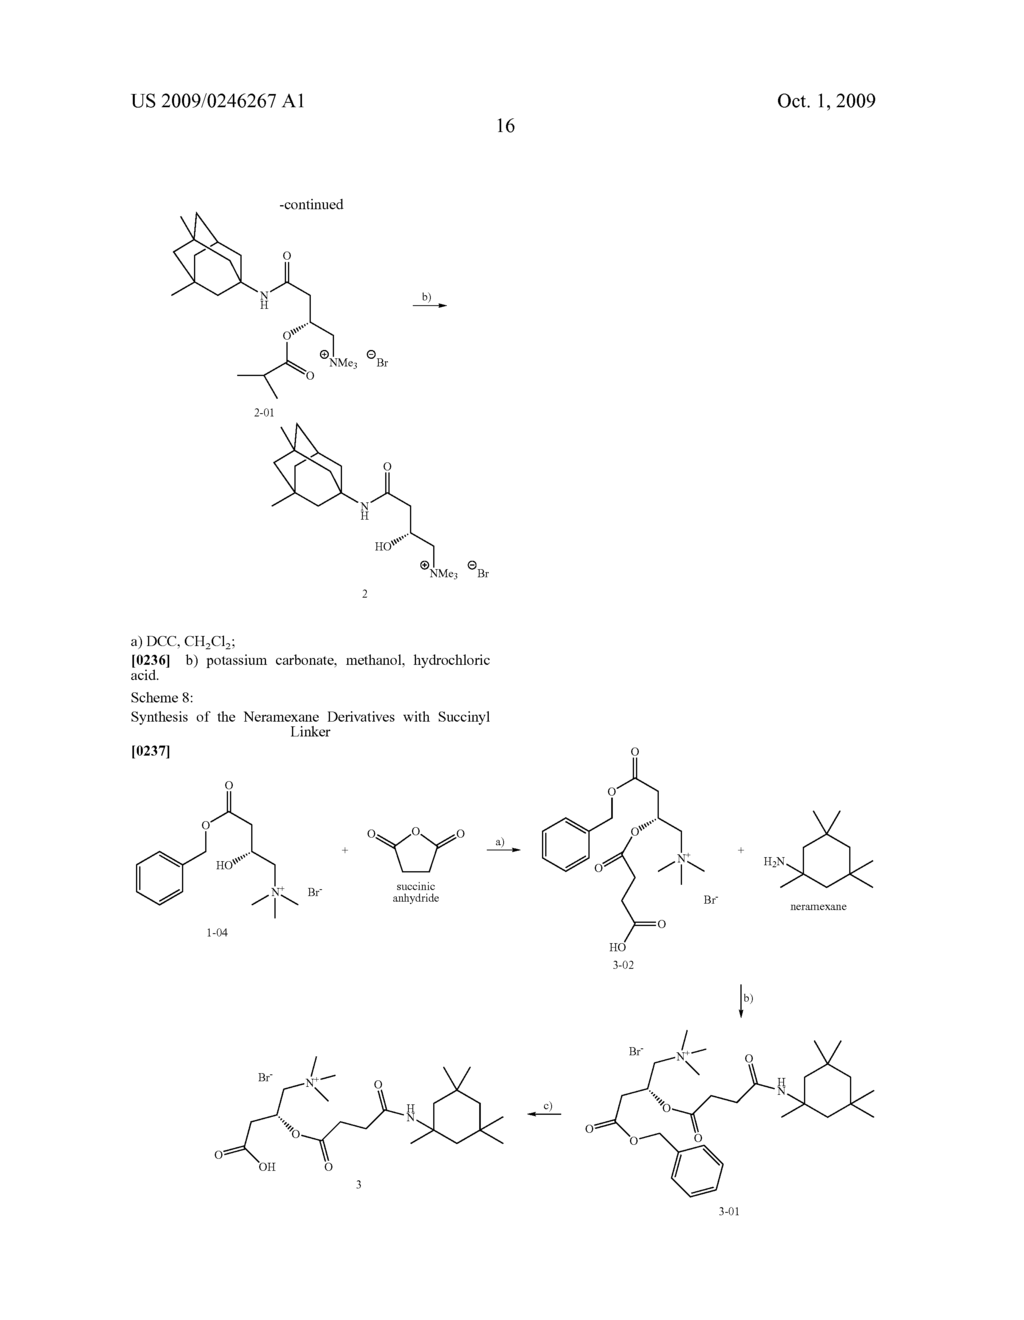 Carnitine Conjugates of Adamantanamines and Neramexane Derivatives as Dual Prodrugs for Various Uses - diagram, schematic, and image 17